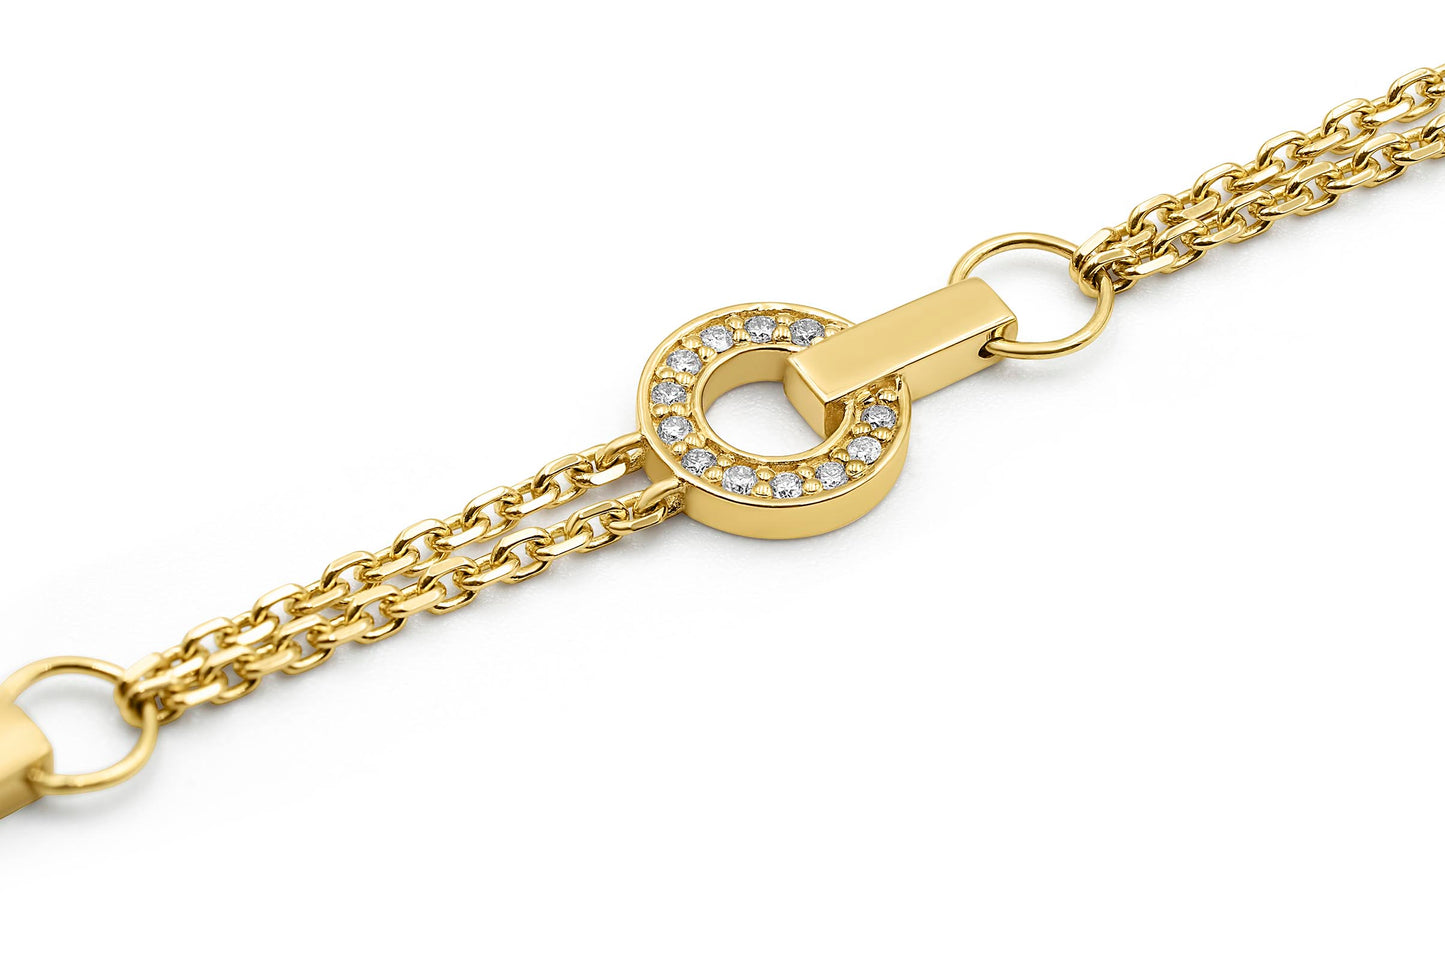 Bracelet with diamonds and yellow gold chain